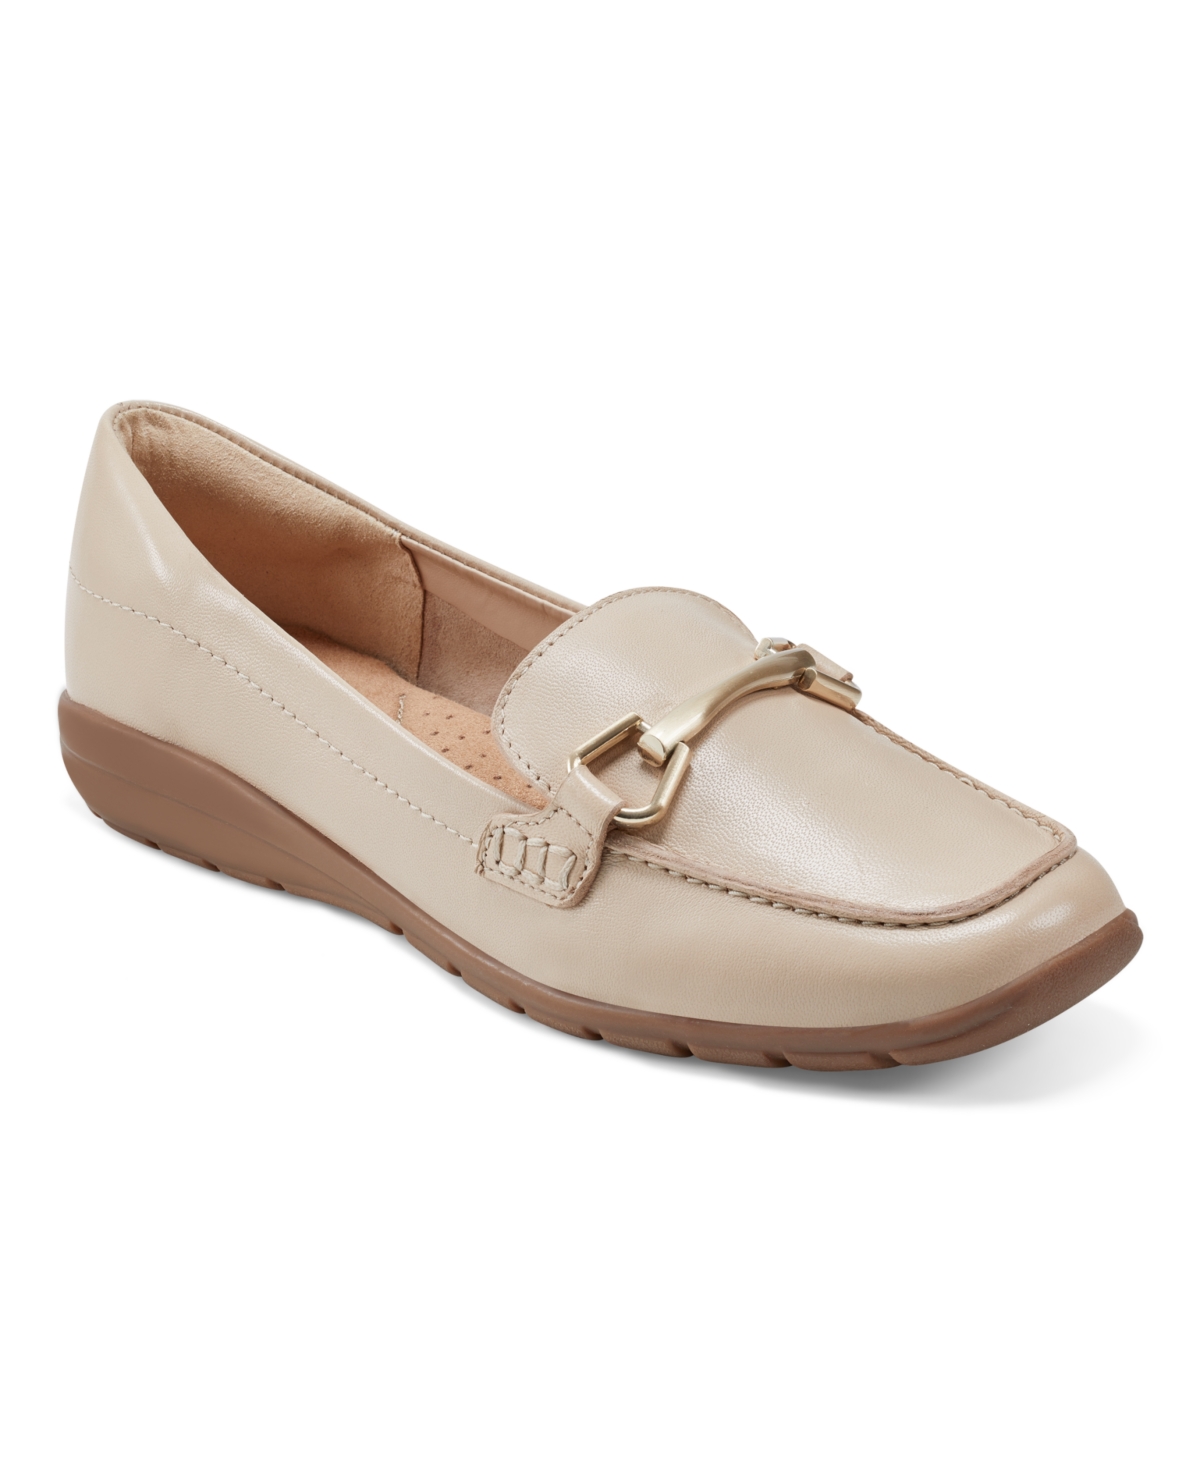 Shop Easy Spirit Women's Eflex Amalie Square Toe Casual Slip-on Flat Loafers In Medium Natural Leather